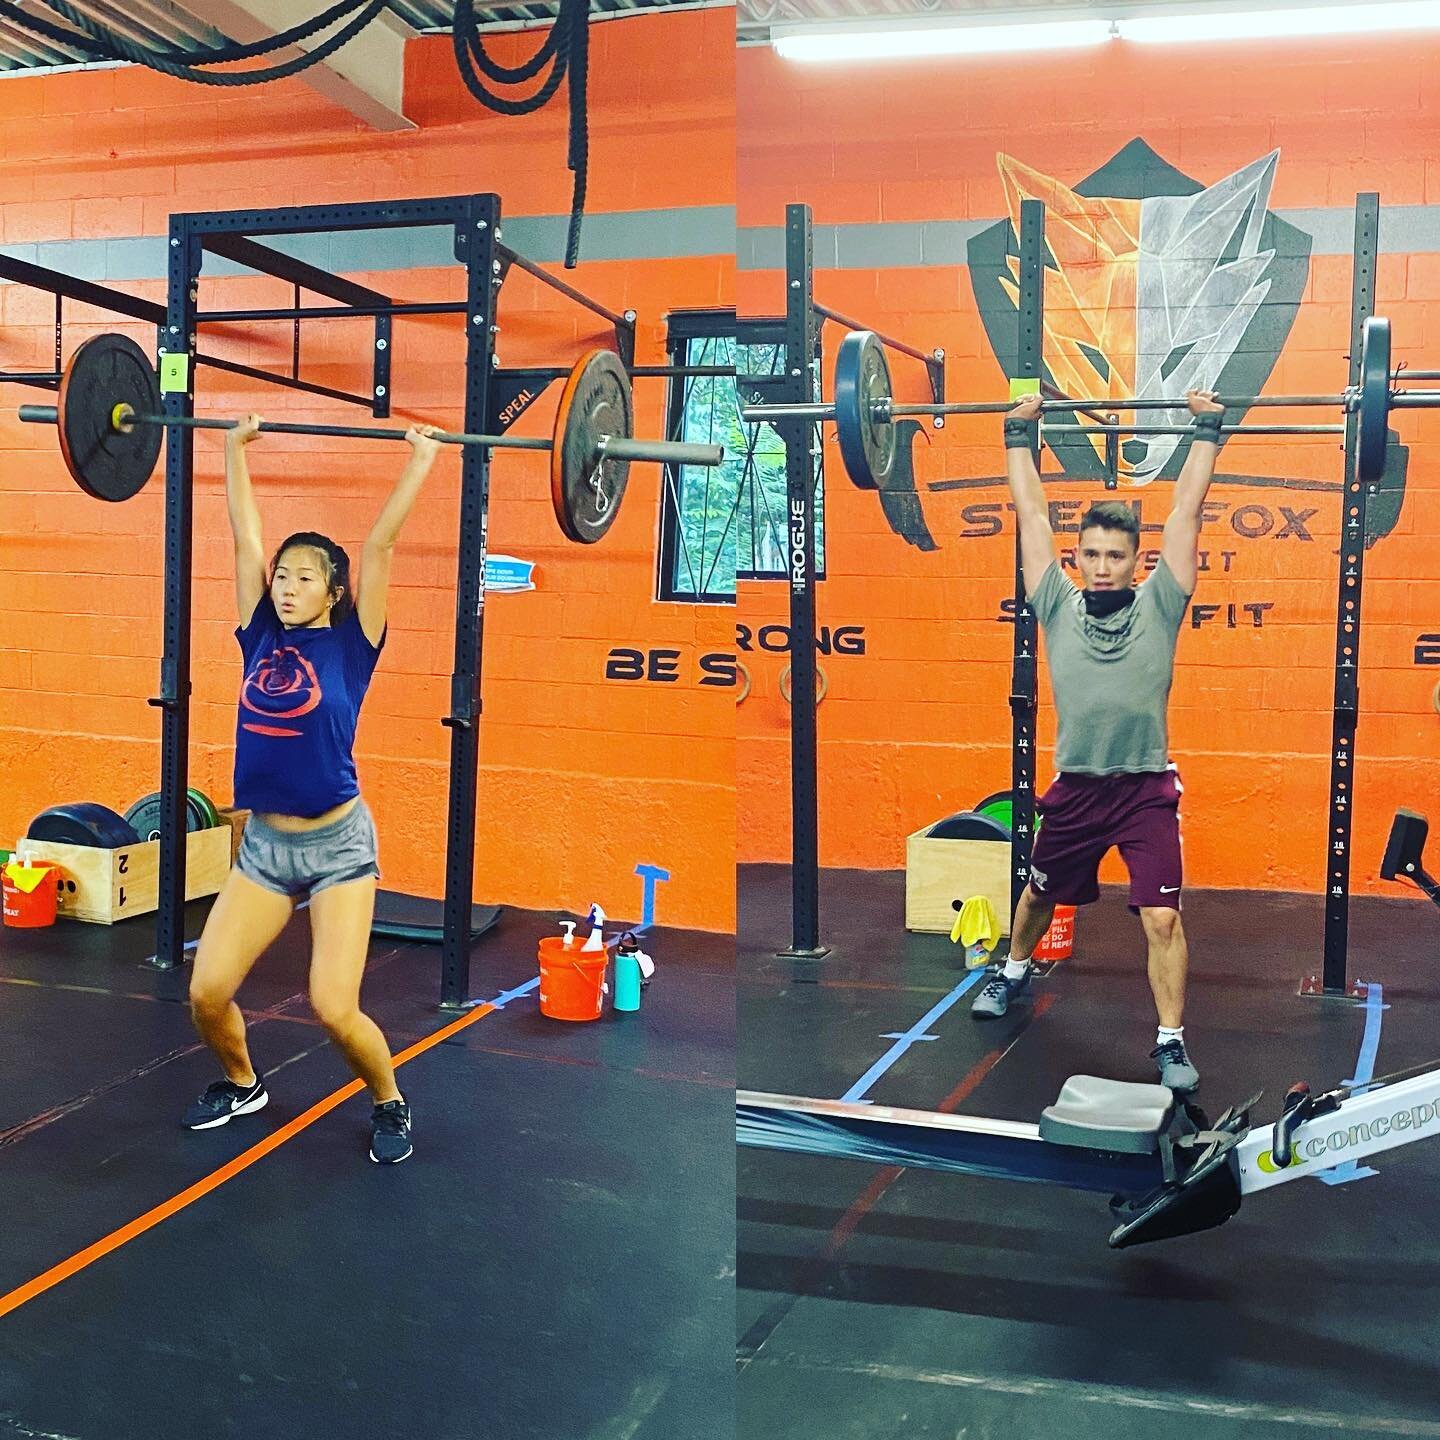 😊Special thanks and very proud 🙏to wish these two great success as they start their journey in college  @jesssxiao @__patrickkelly__  #smartandfit #willmissyou #steelfoxfit #functionallyfit